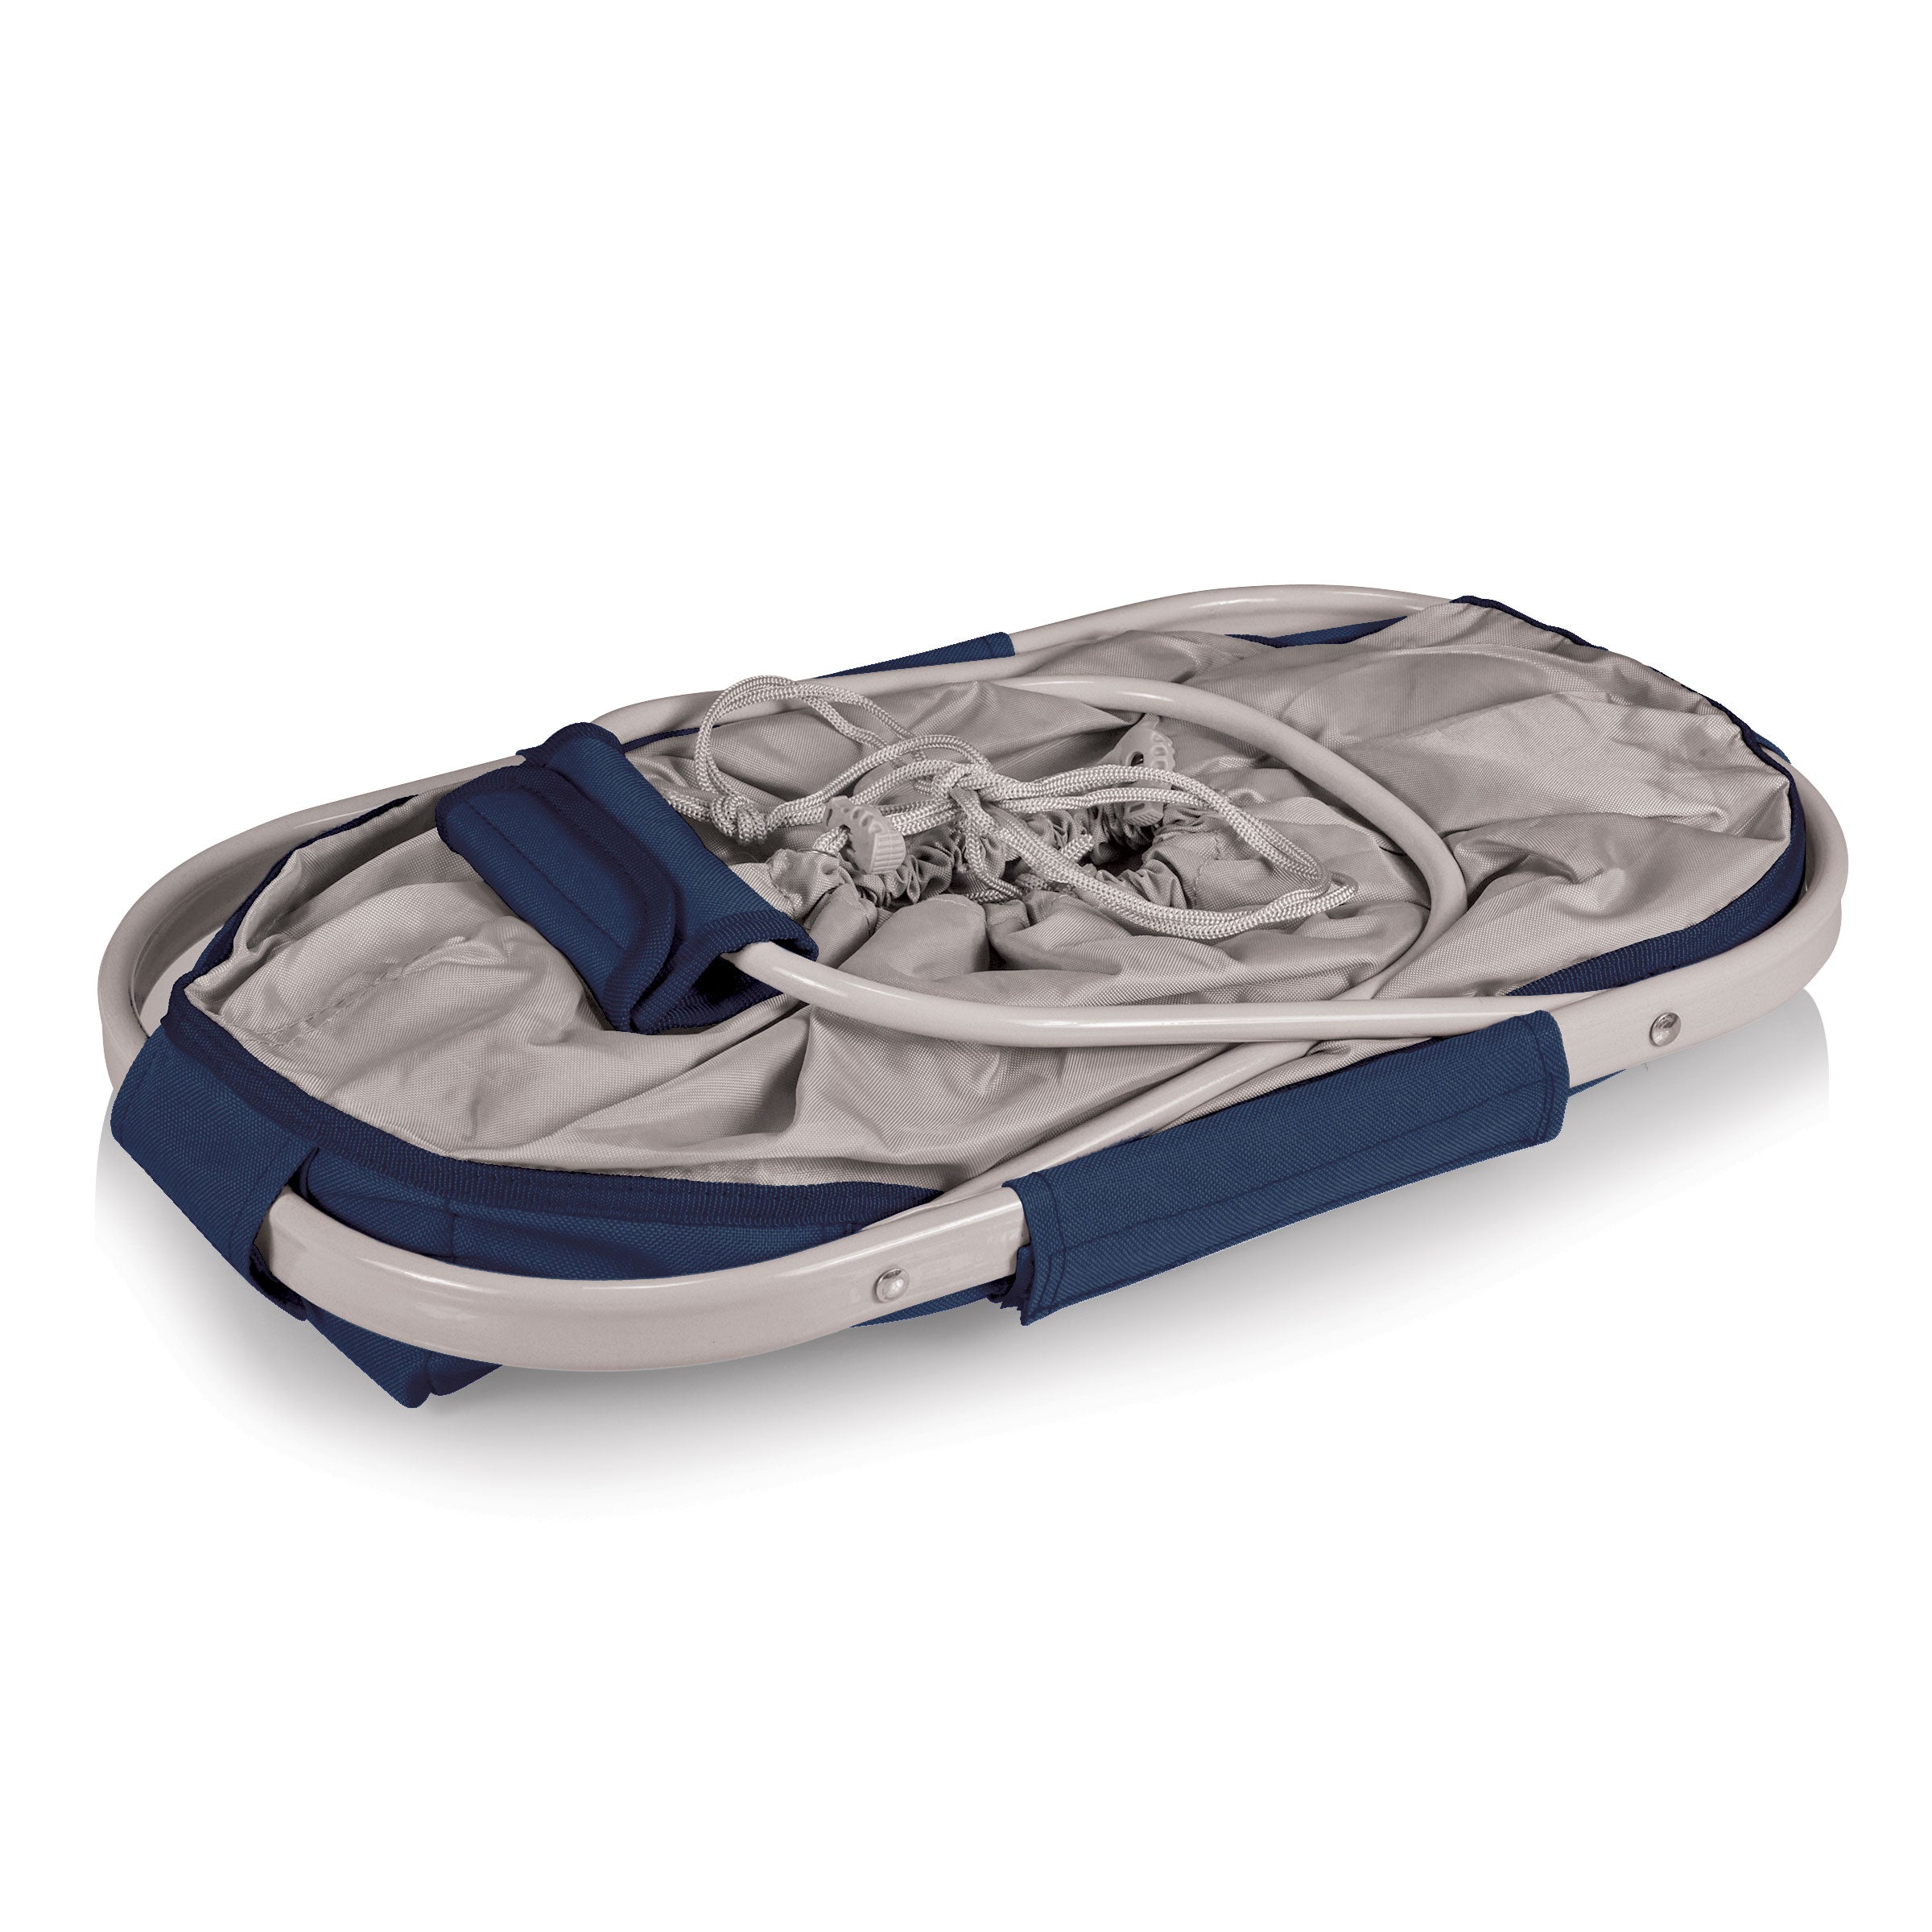 Chicago Bears - Metro Basket Collapsible Cooler Tote